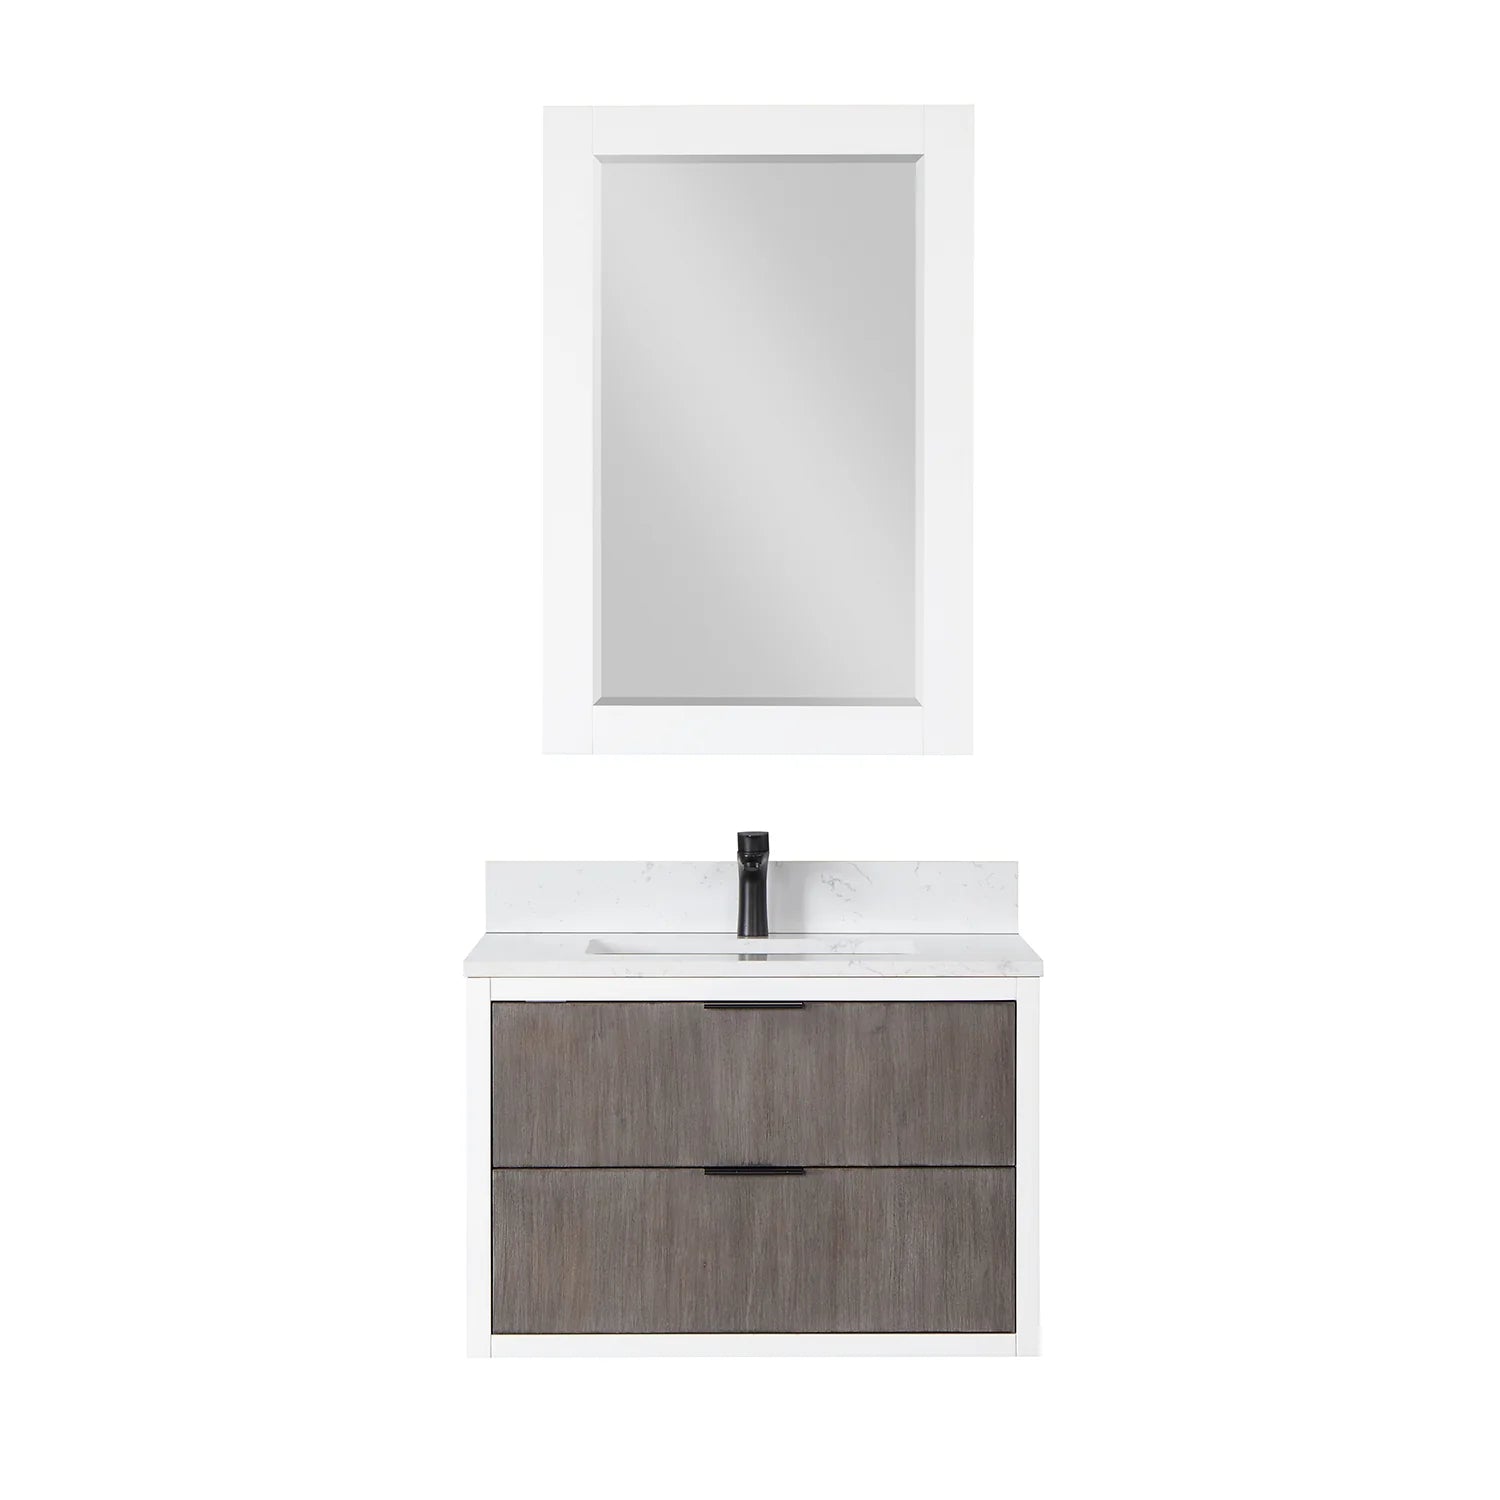 Altair - Dione Single Bathroom Vanity Set with Aosta White Stone Countertop